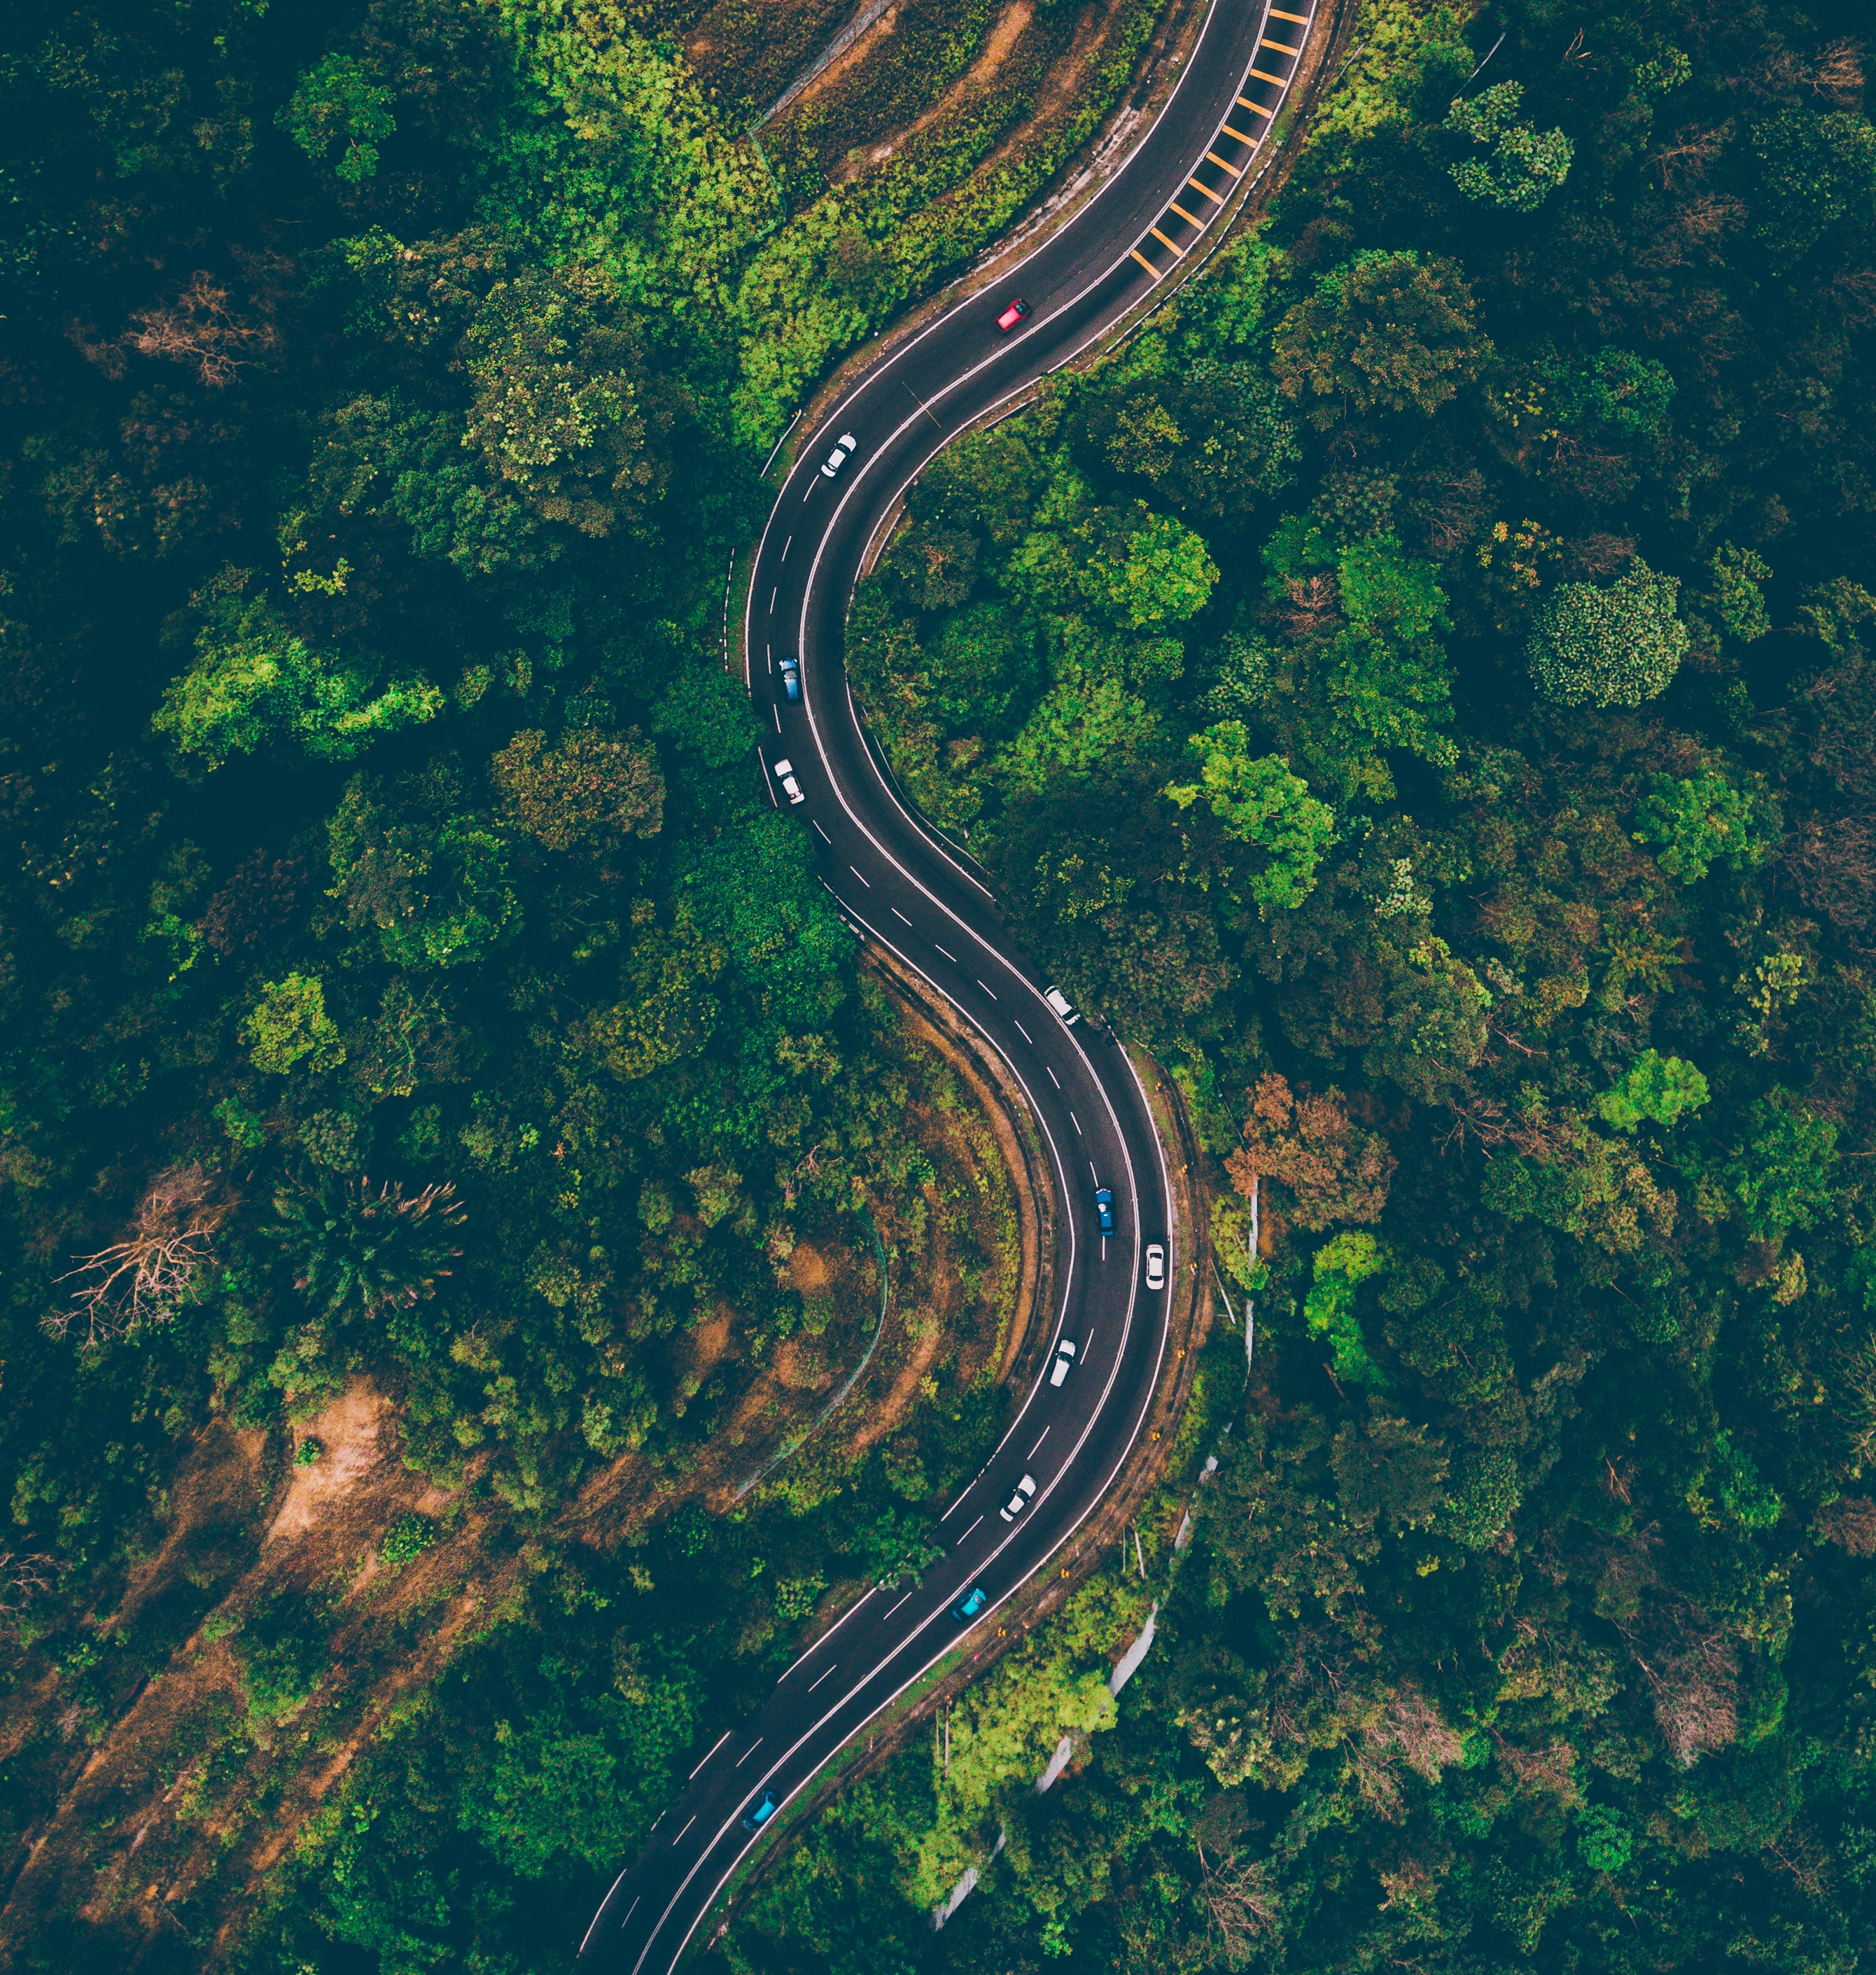 road, sinuous, malaysia, view from above, nature, trees, winding, batang kali QHD